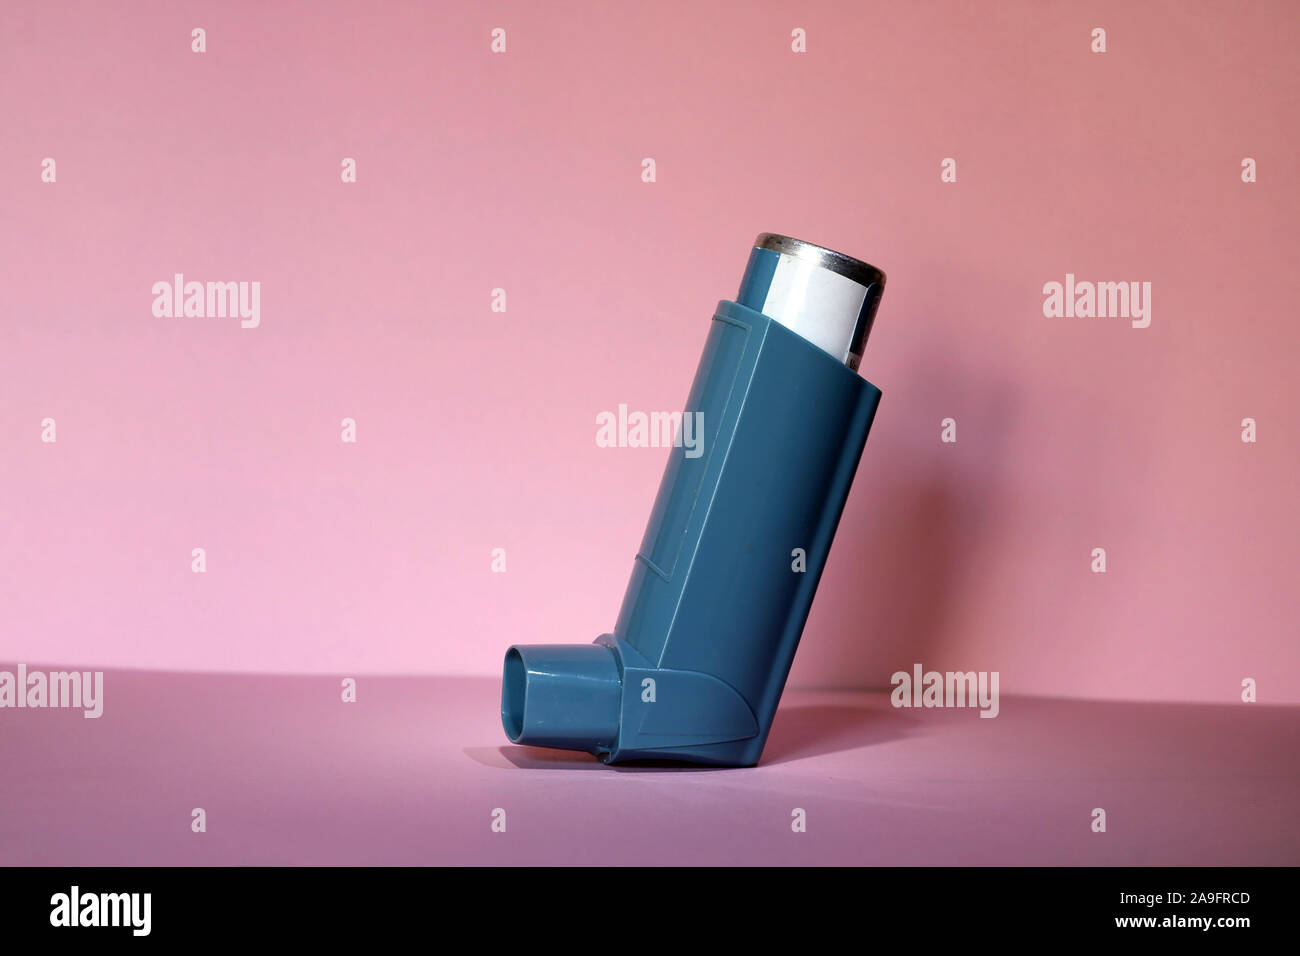 Blue asthma inhaler on a pink background. Pharmaceutical product to prevent and treat an asthma attack. Stock Photo